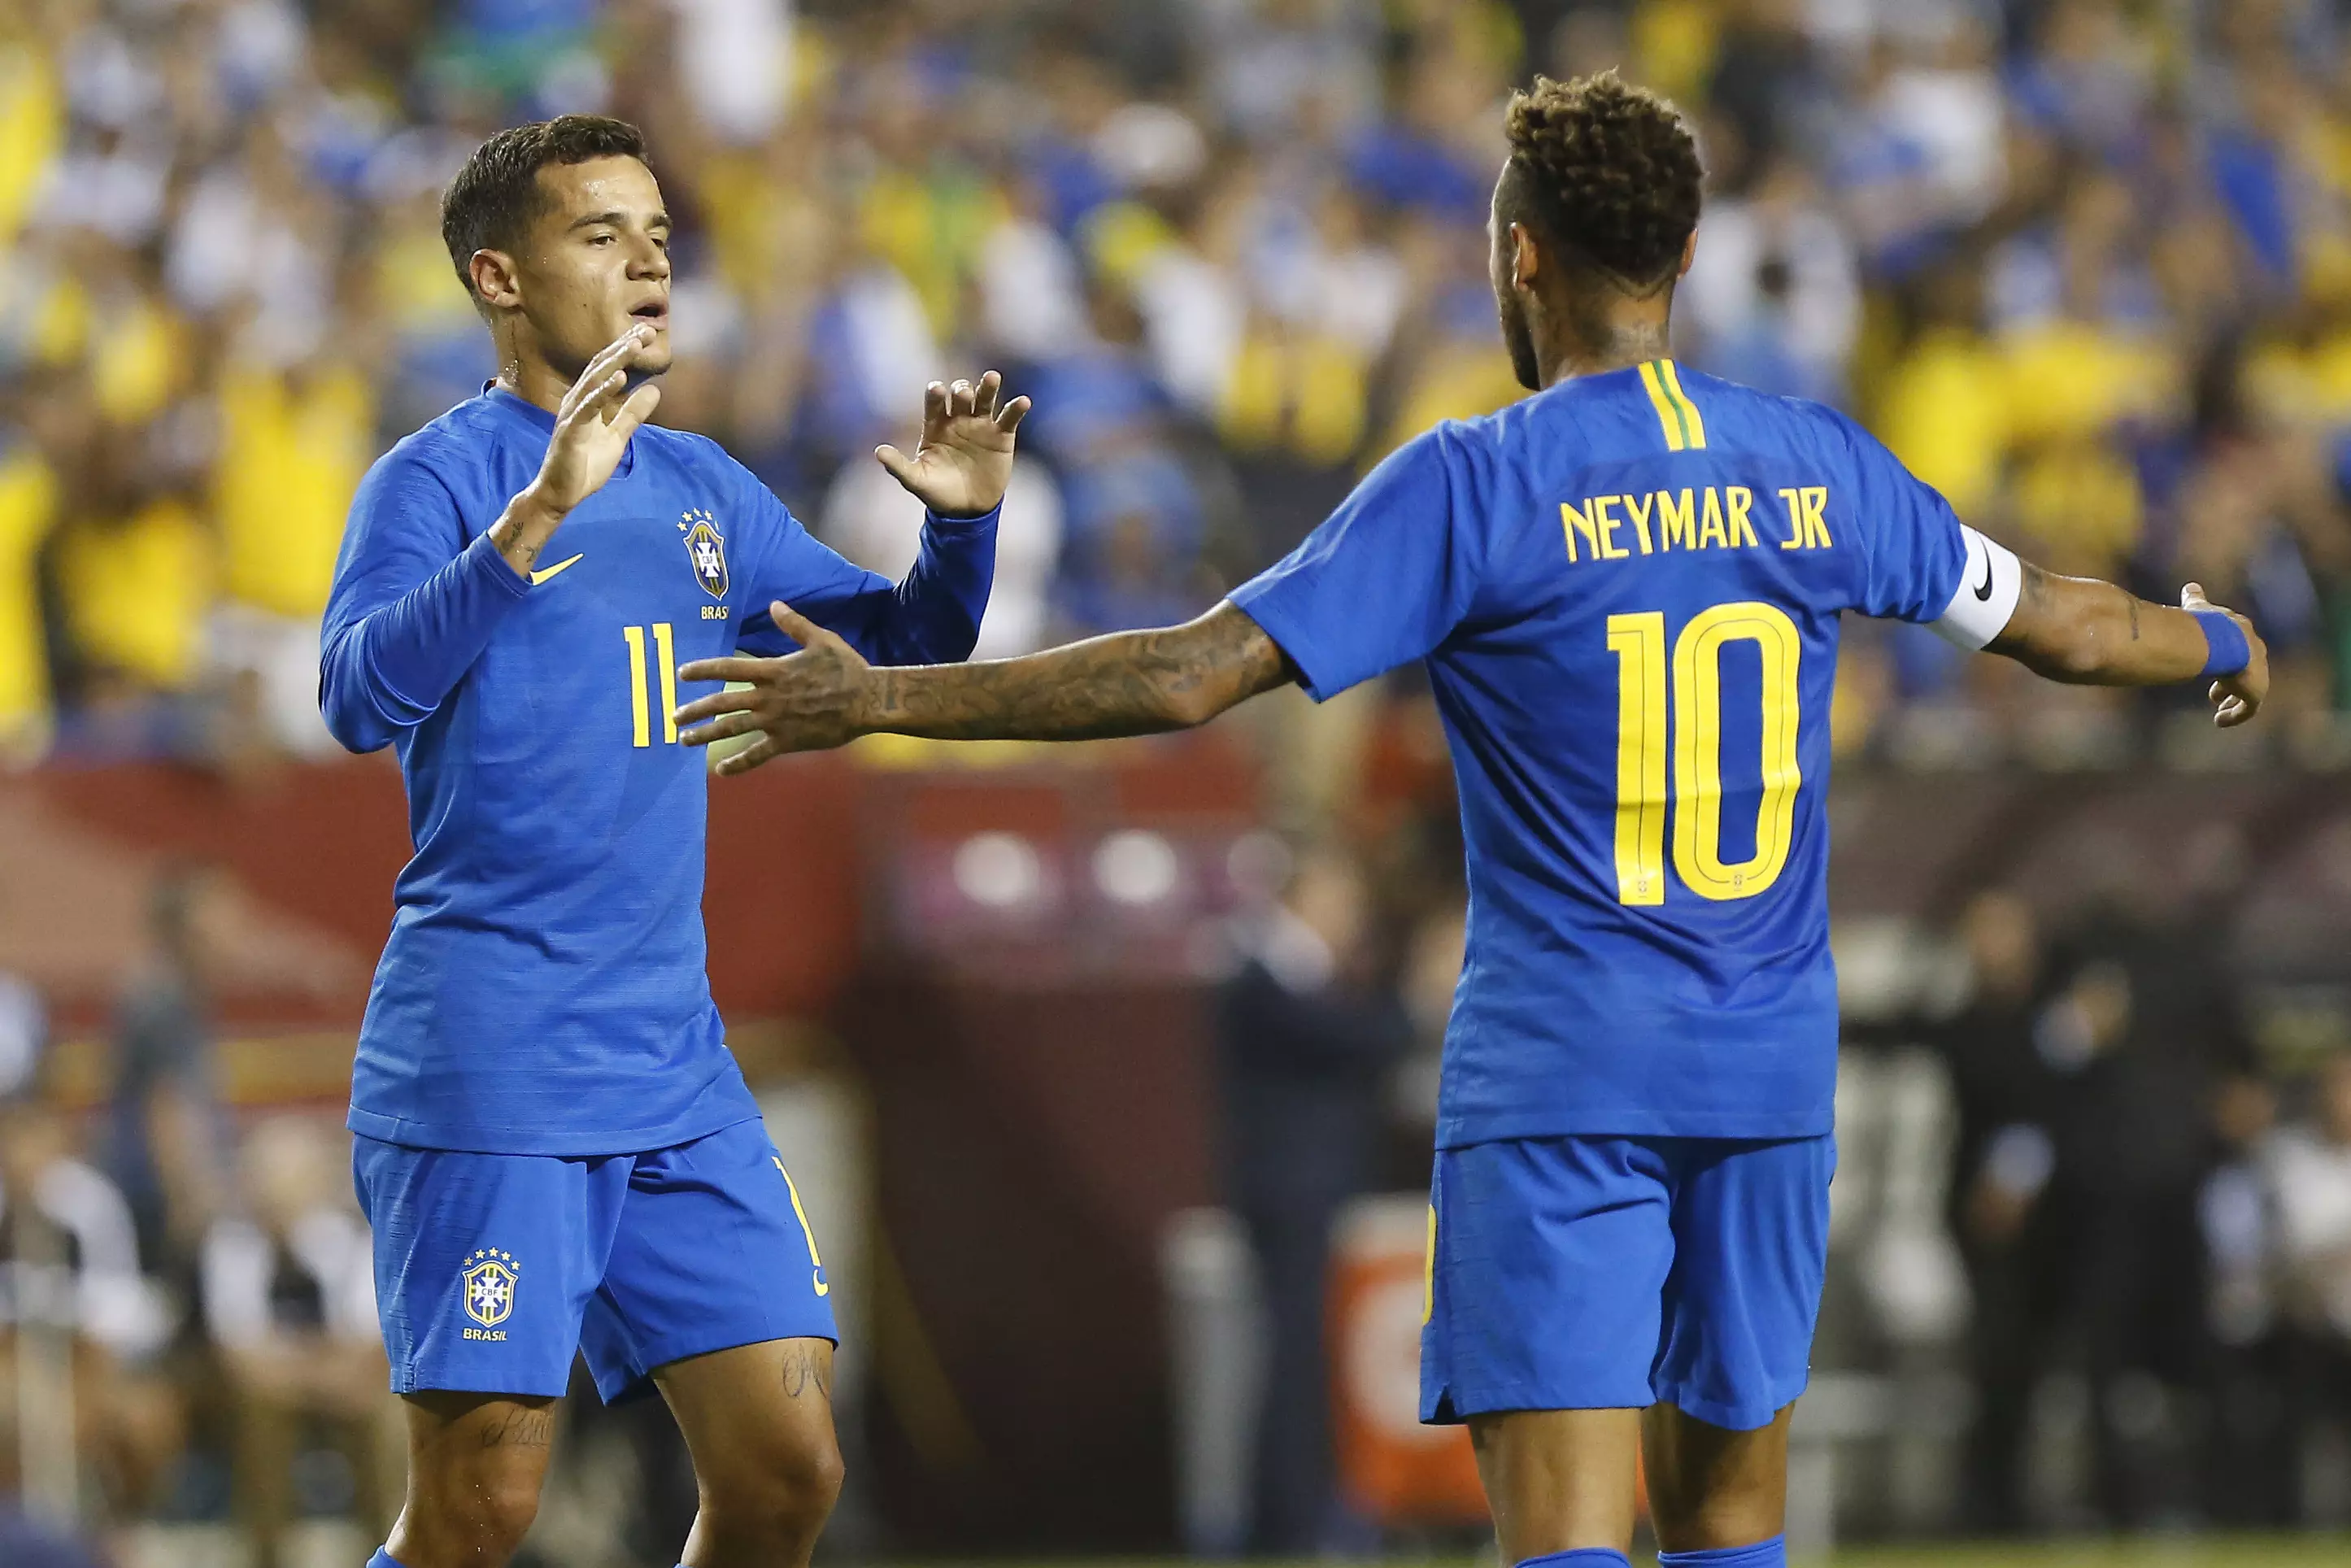 Coutinho and Neymar's transfer sagas were closely linked. Image: PA Images